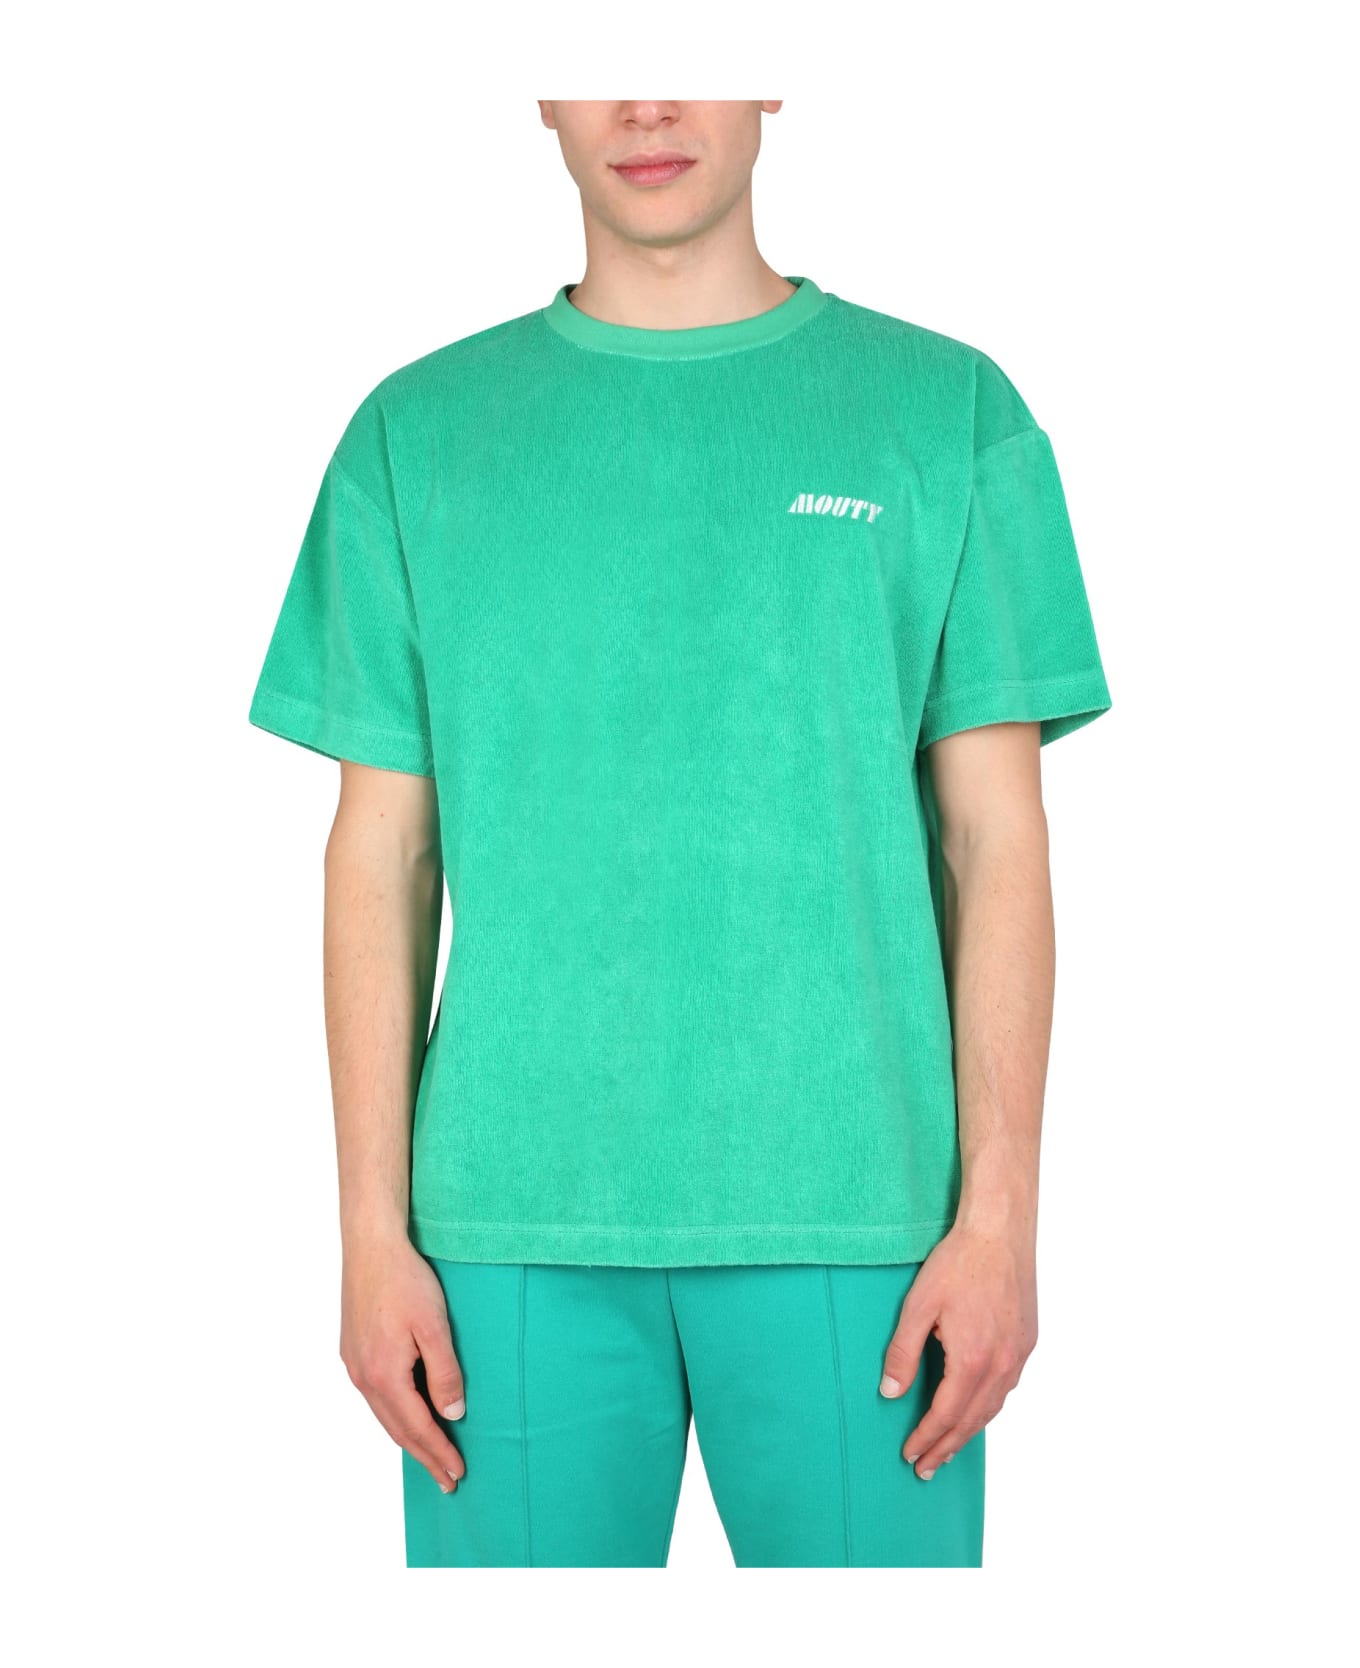 Mouty Terry T-shirt - VERDE